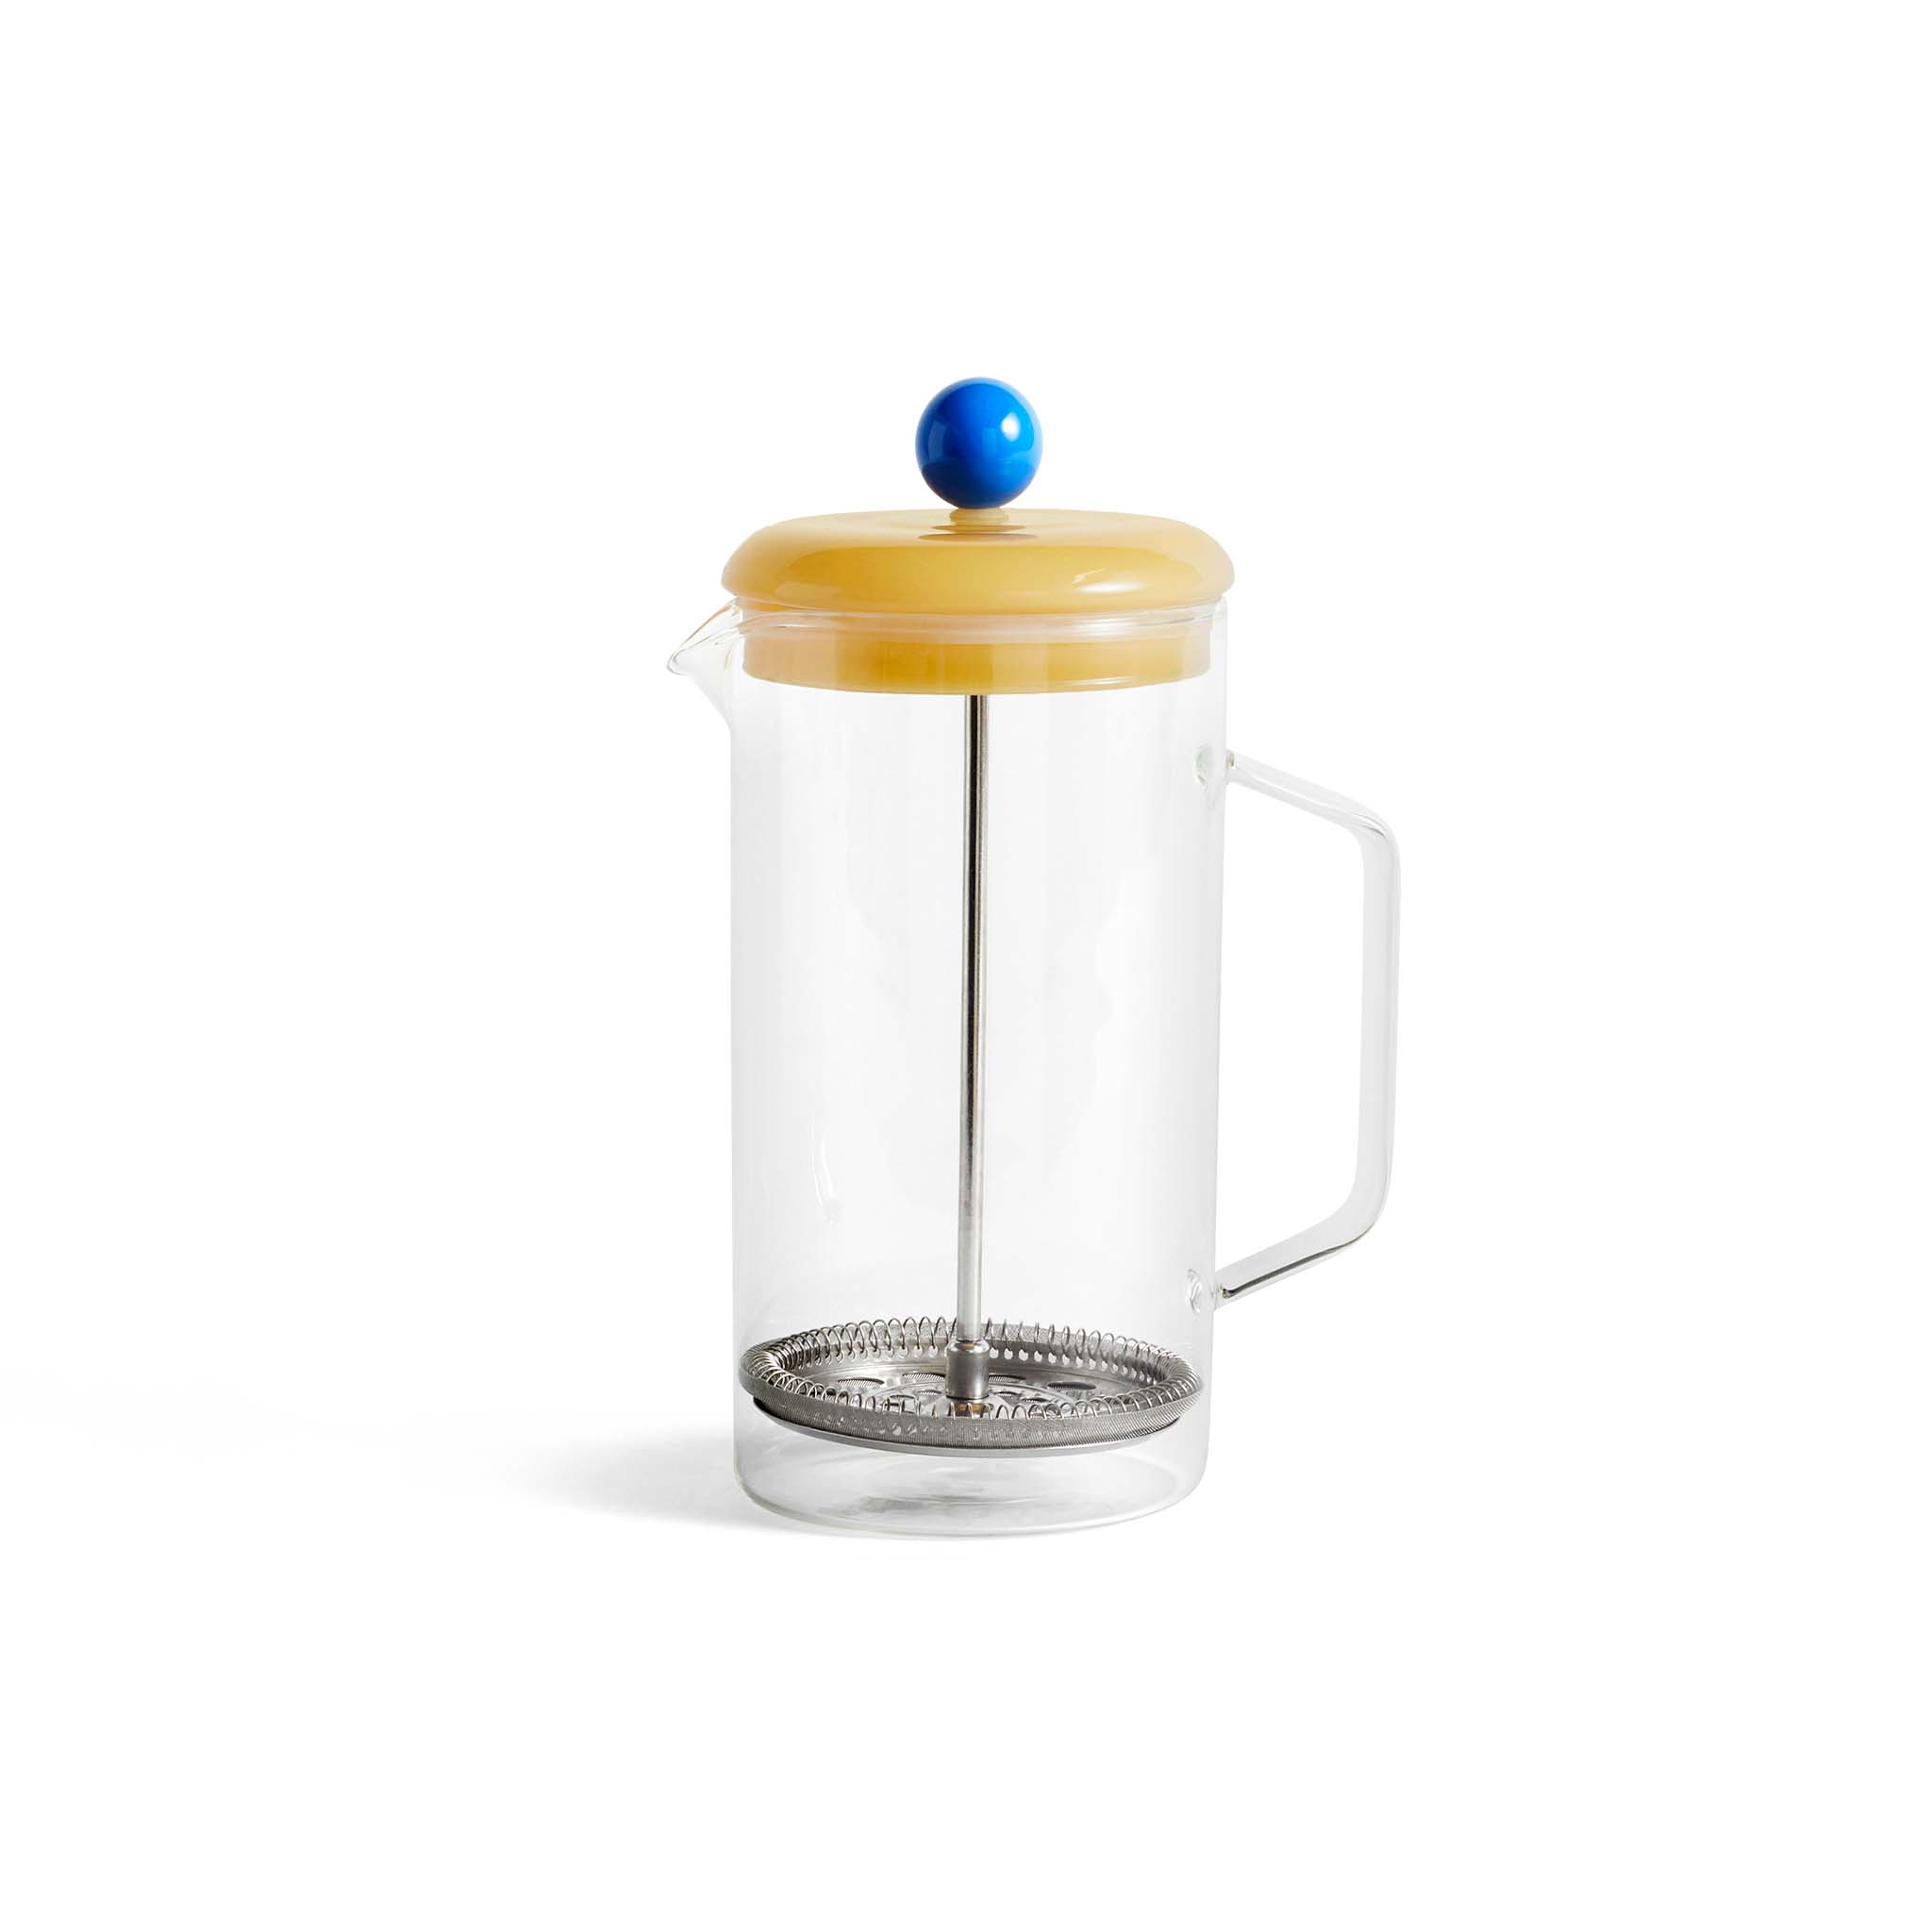 French Press Coffee Brewer by Hay